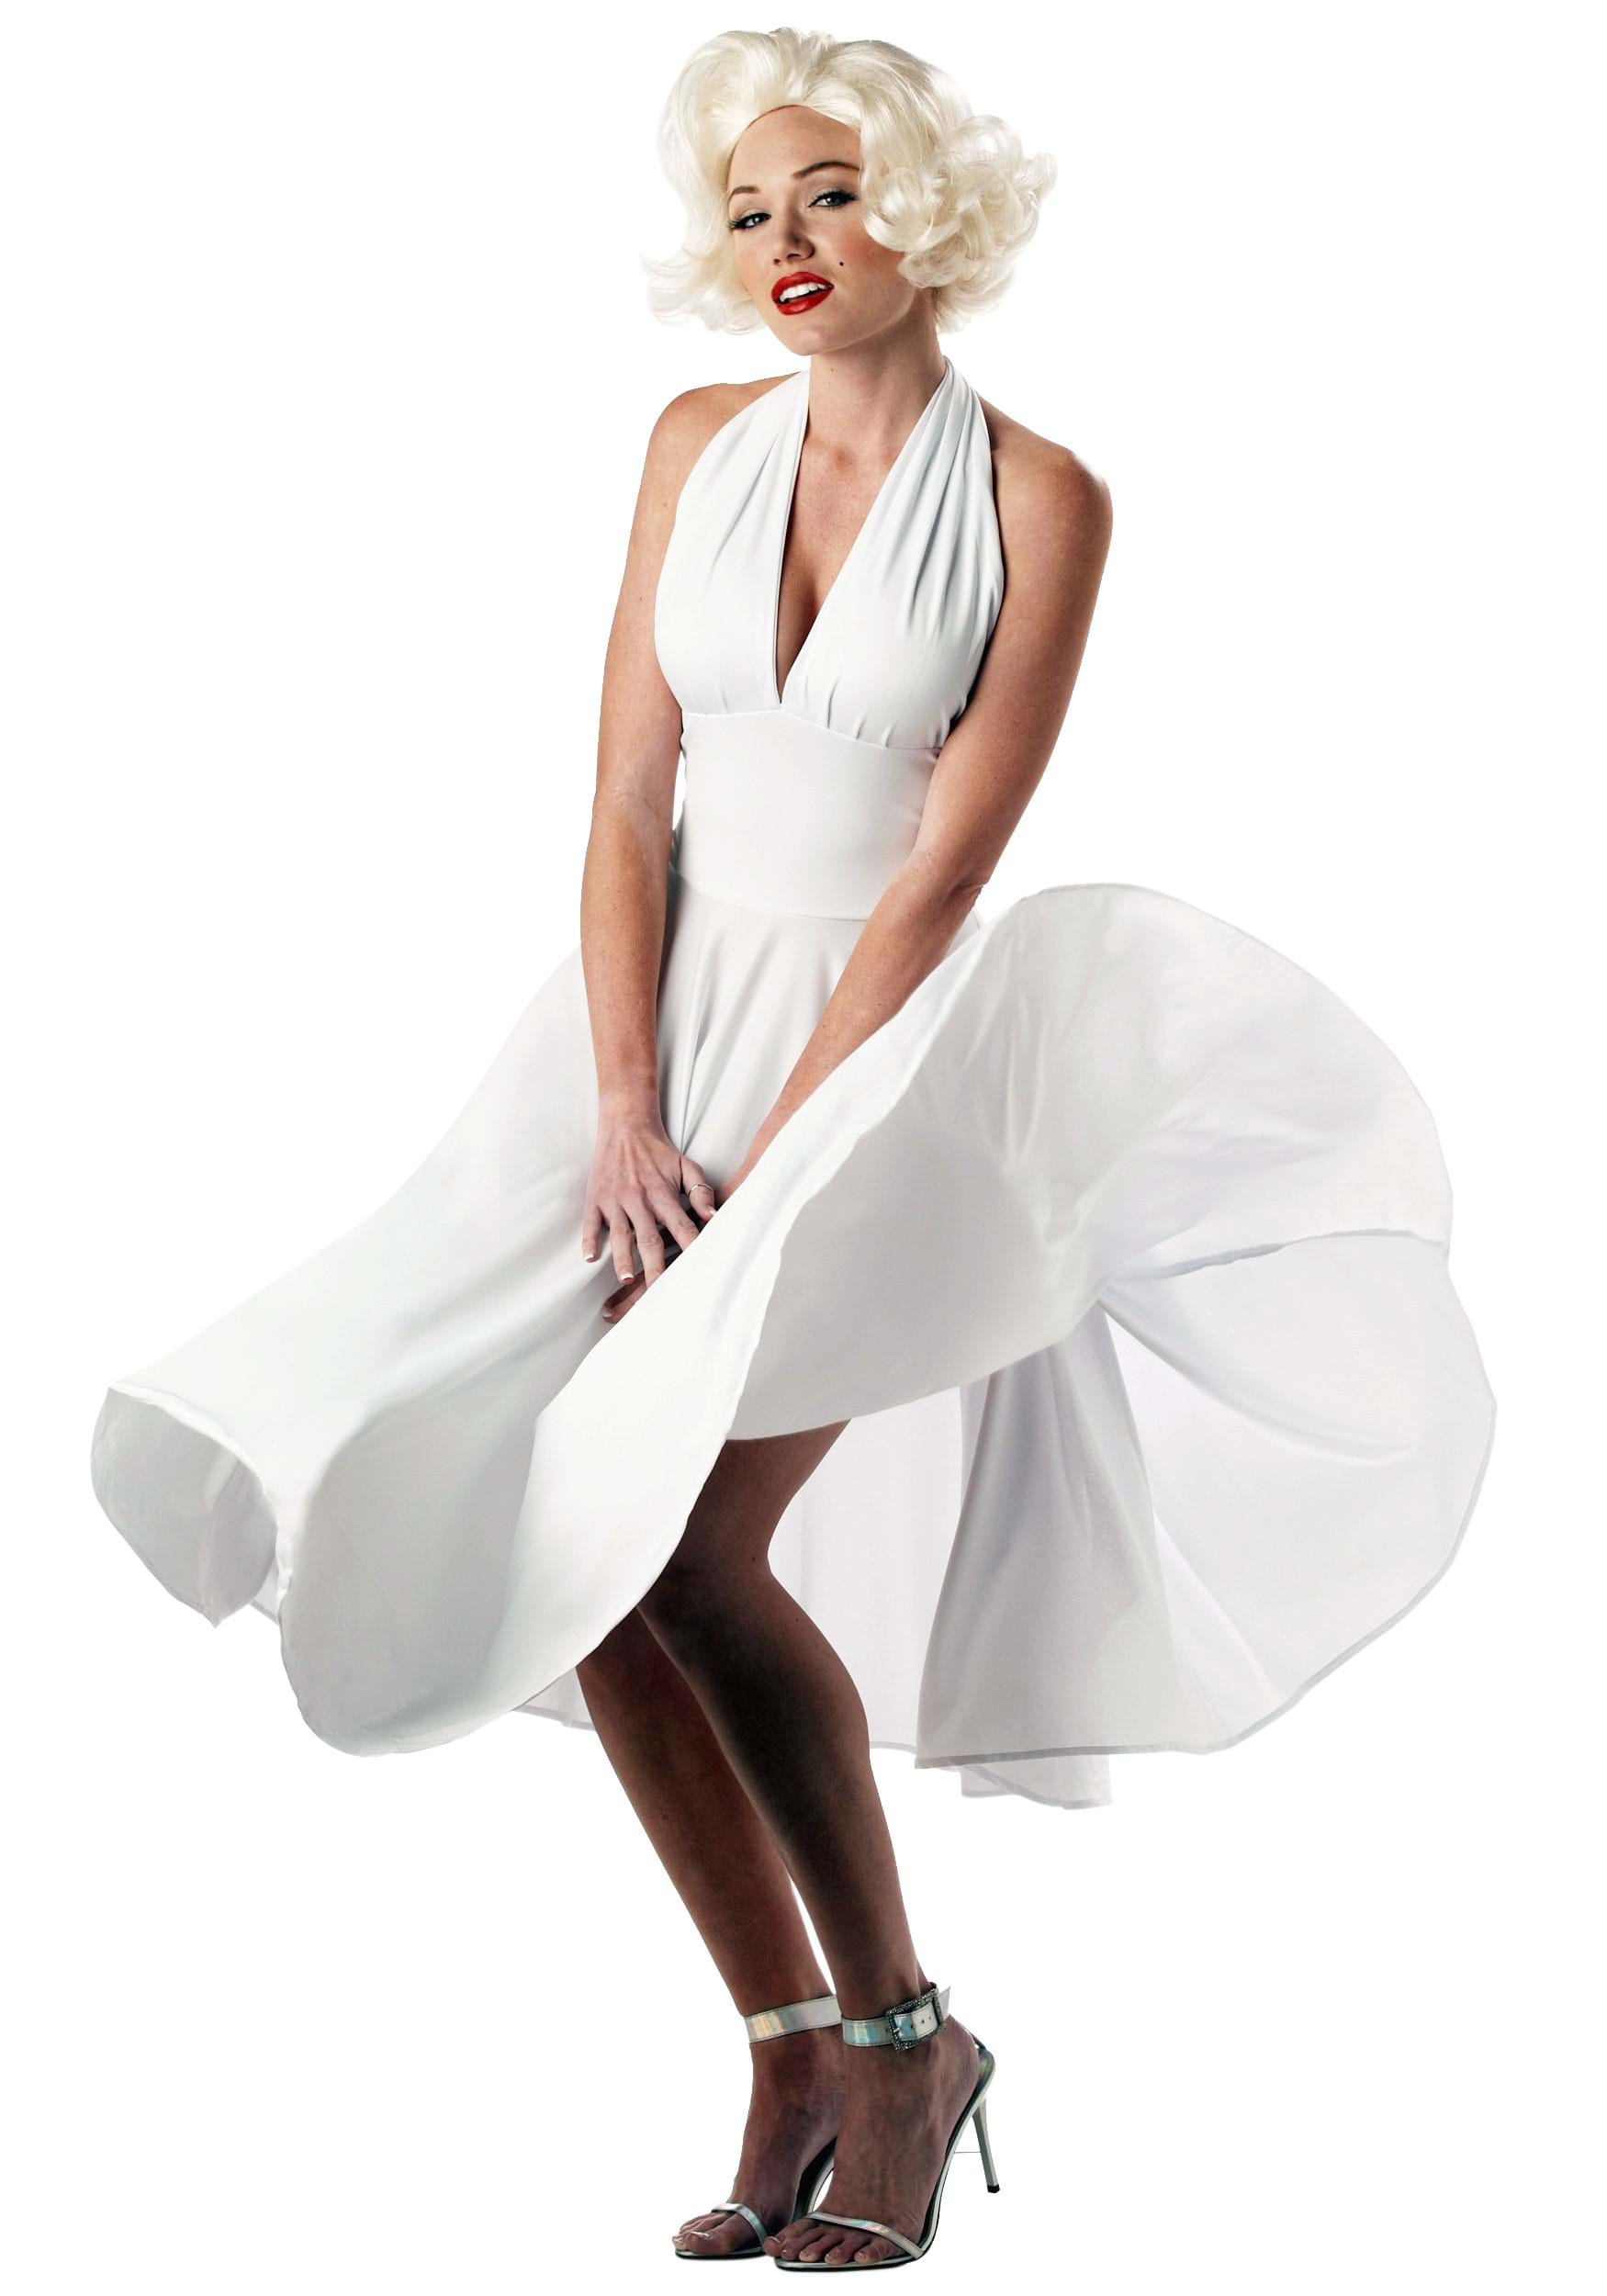 Photos - Fancy Dress California Costume Collection Marilyn Monroe Dress Costume | Sexy White Co 